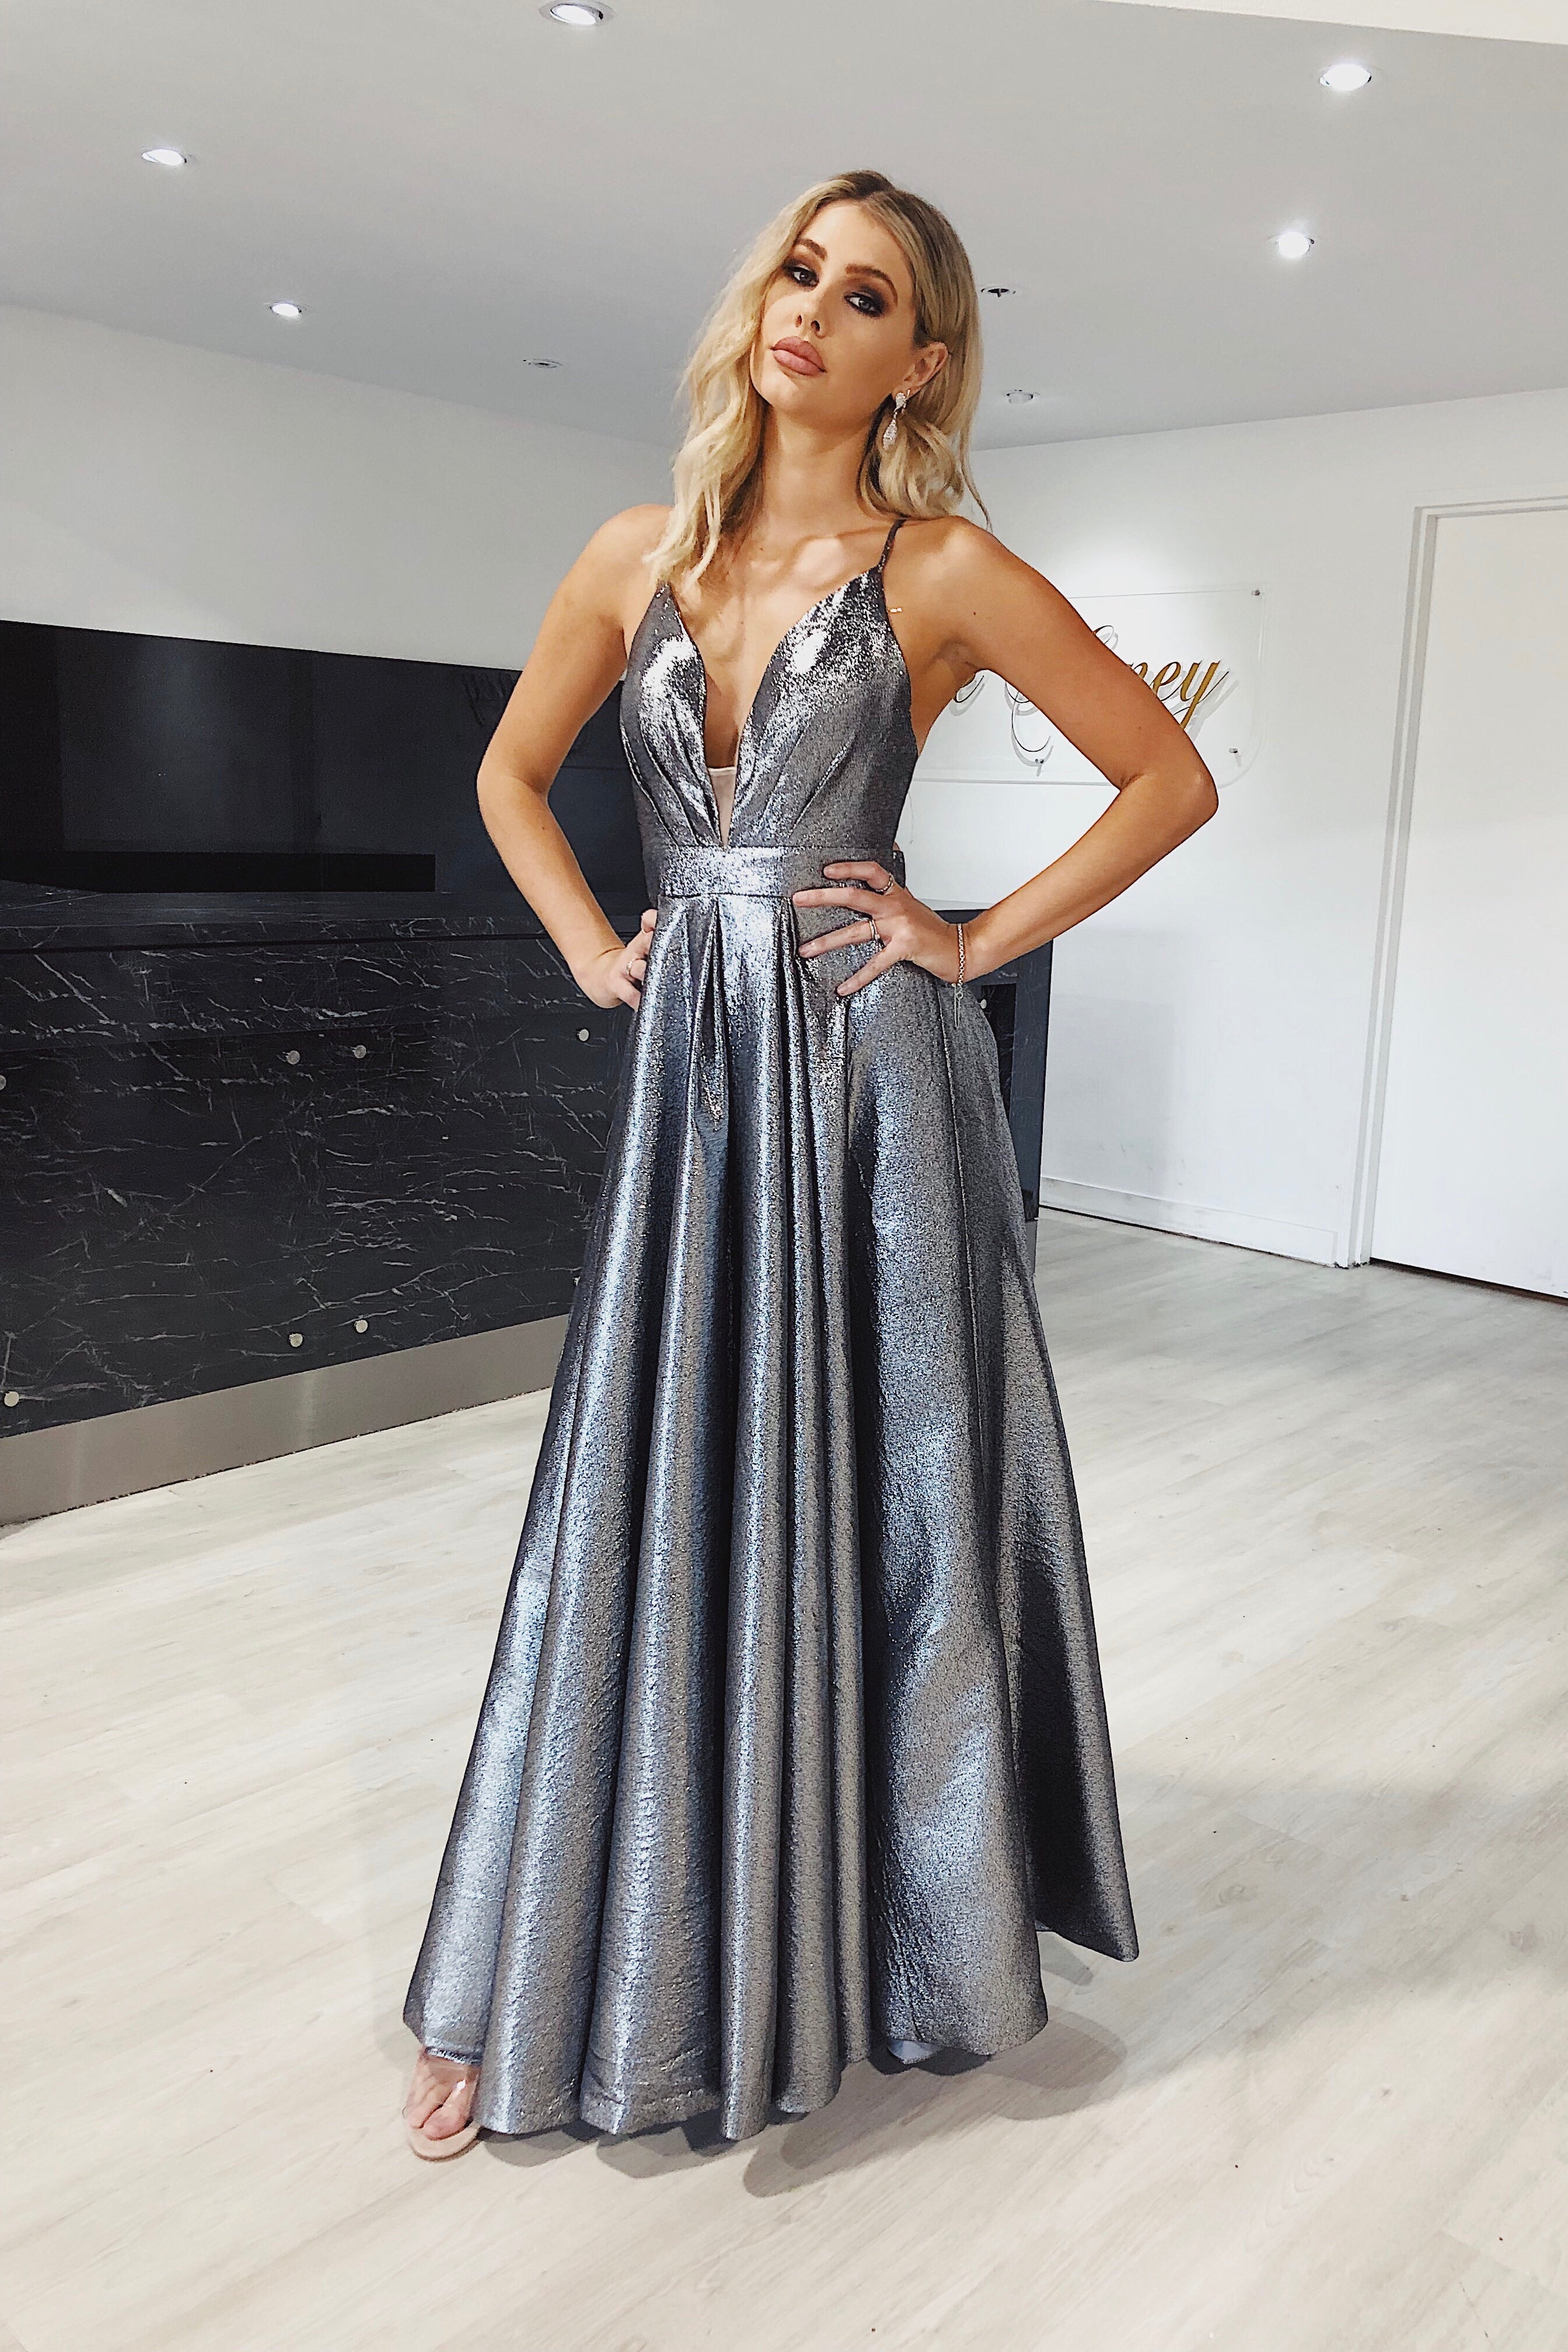 Honey Couture TAZMIN Gunmetal Metallic Silver Formal Gown Private Label$ AfterPay Humm ZipPay LayBuy Sezzle